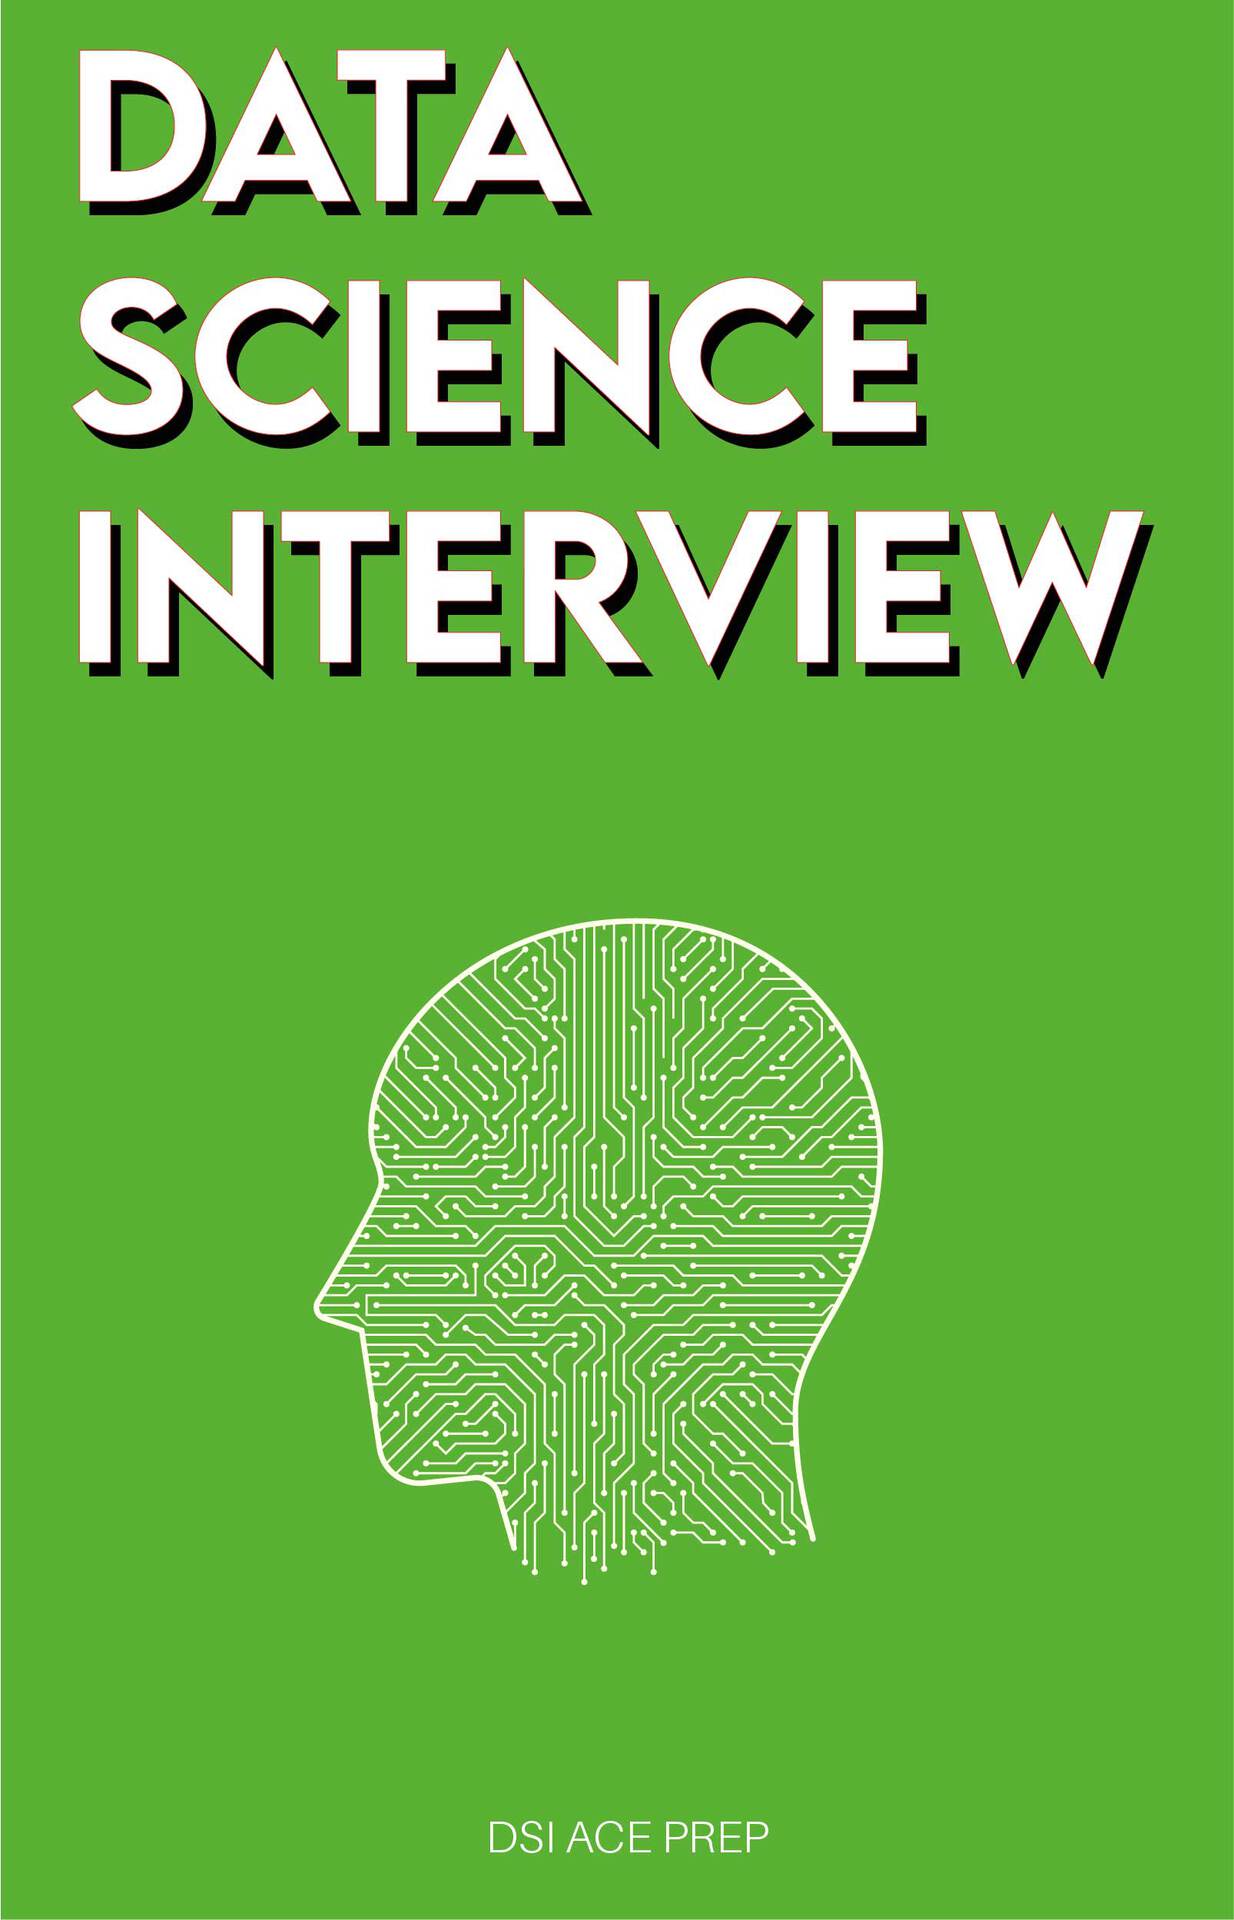 Data Science Interview: Prep for SQL, Panda, Python, R Language, Machine Learning, DBMS and RDBMS - and More - the Full Data Scientist Interview Handbook